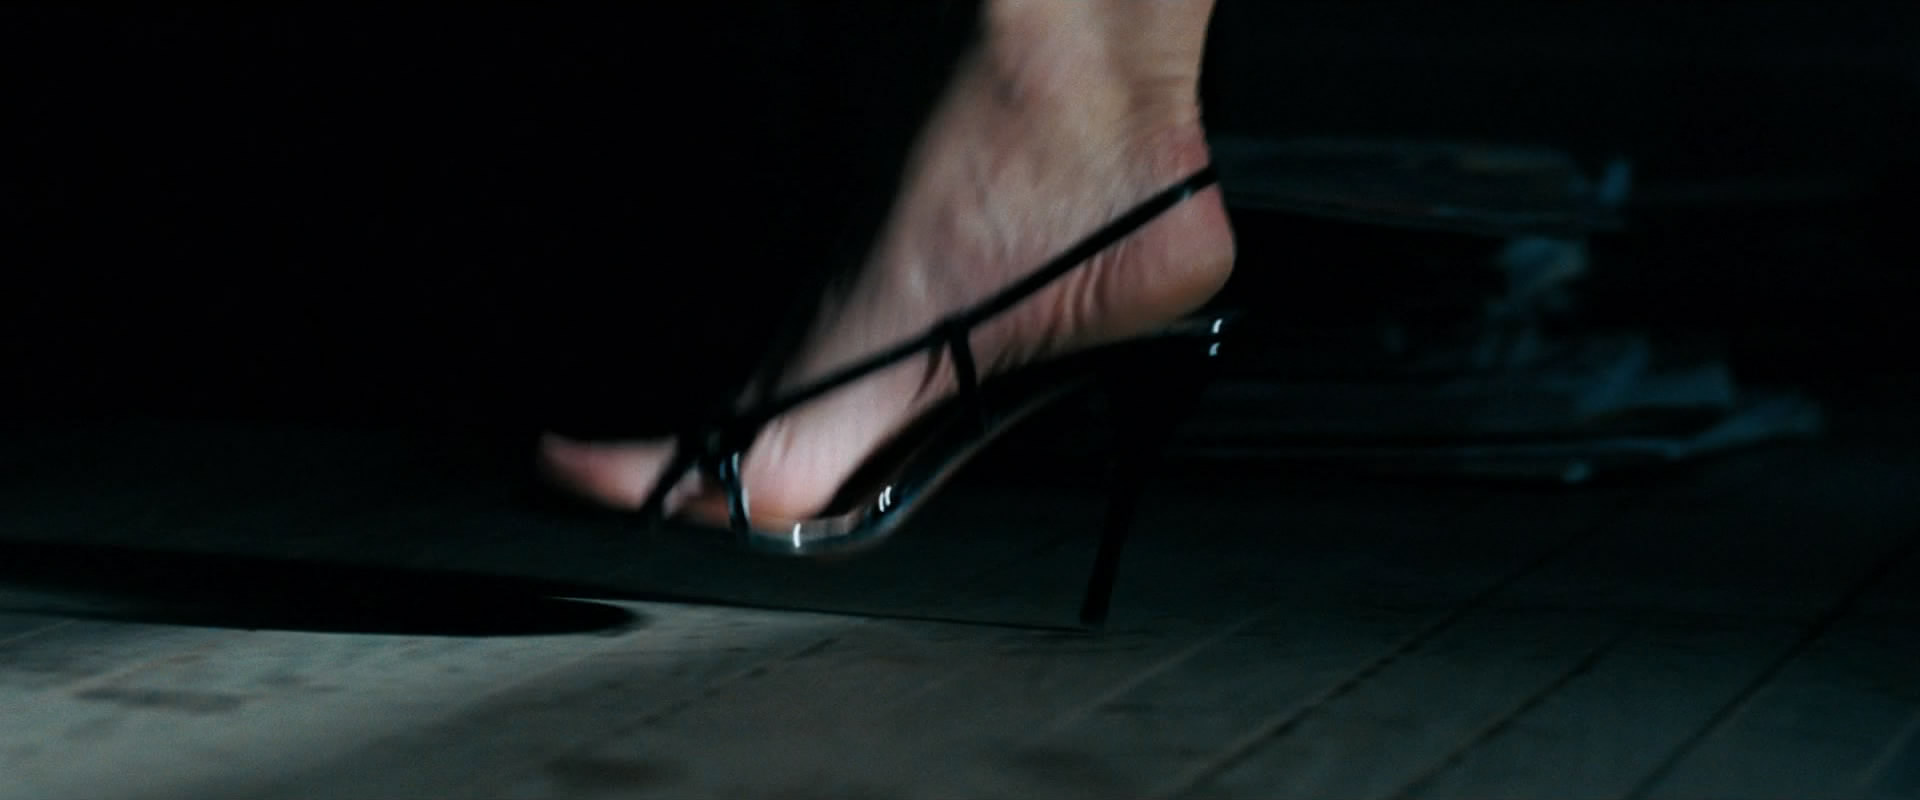 People who liked Sienna Guillory's feet, also liked.